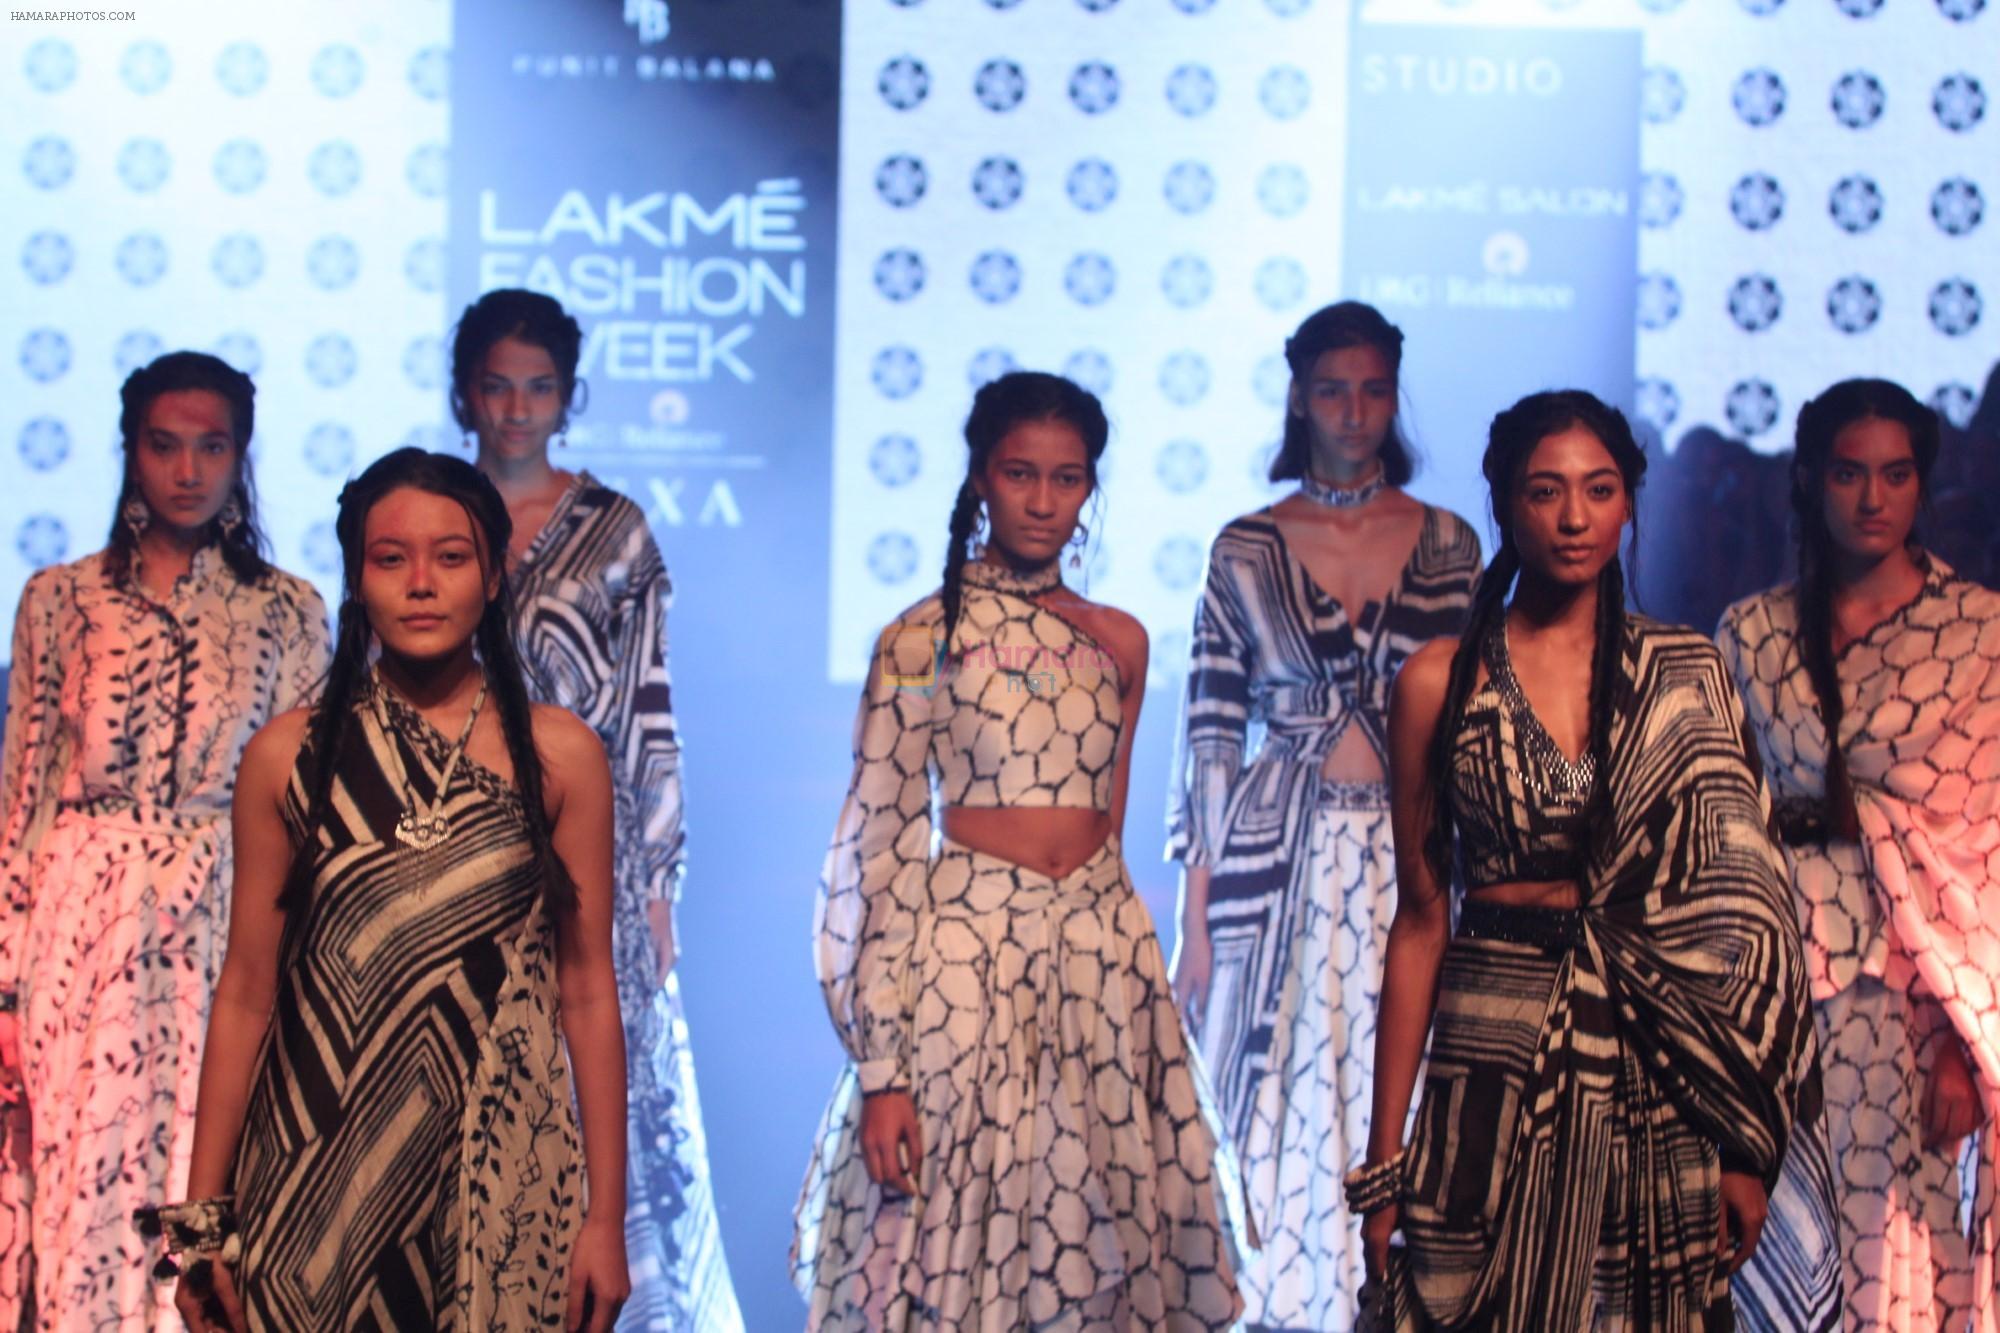 Model walk the Ramp on Day 5 at Lakme Fashion Week 2019 on 3rd Feb 2019